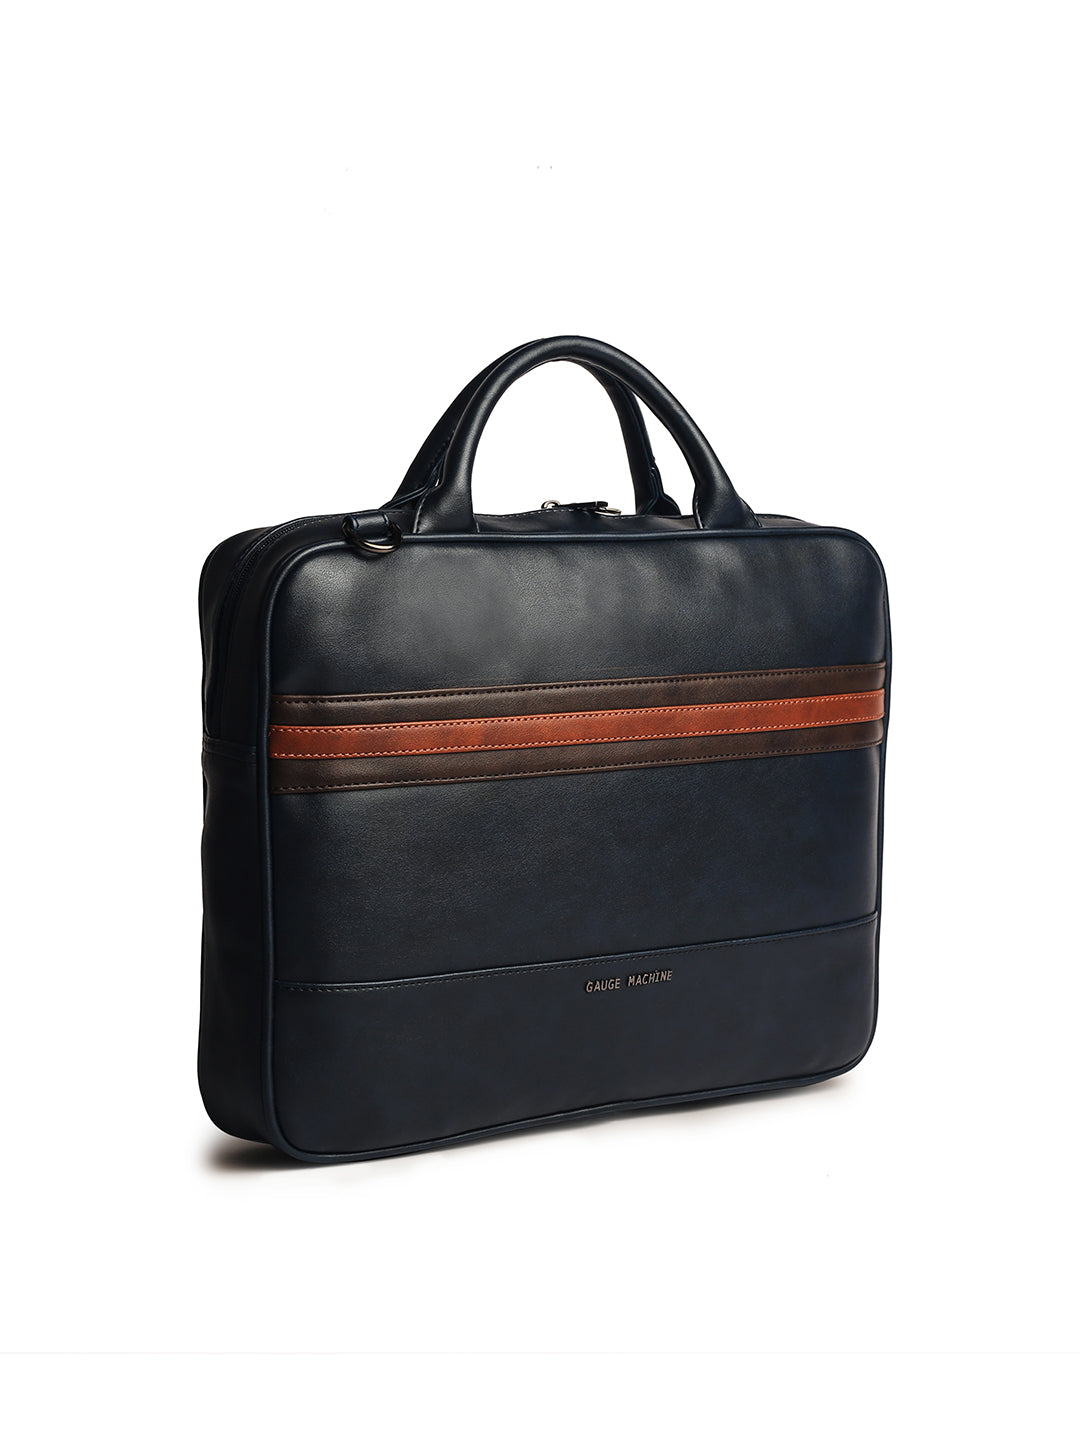 Gauge Machine 16" Navy Appointee Laptop Bag with Detachable Strap